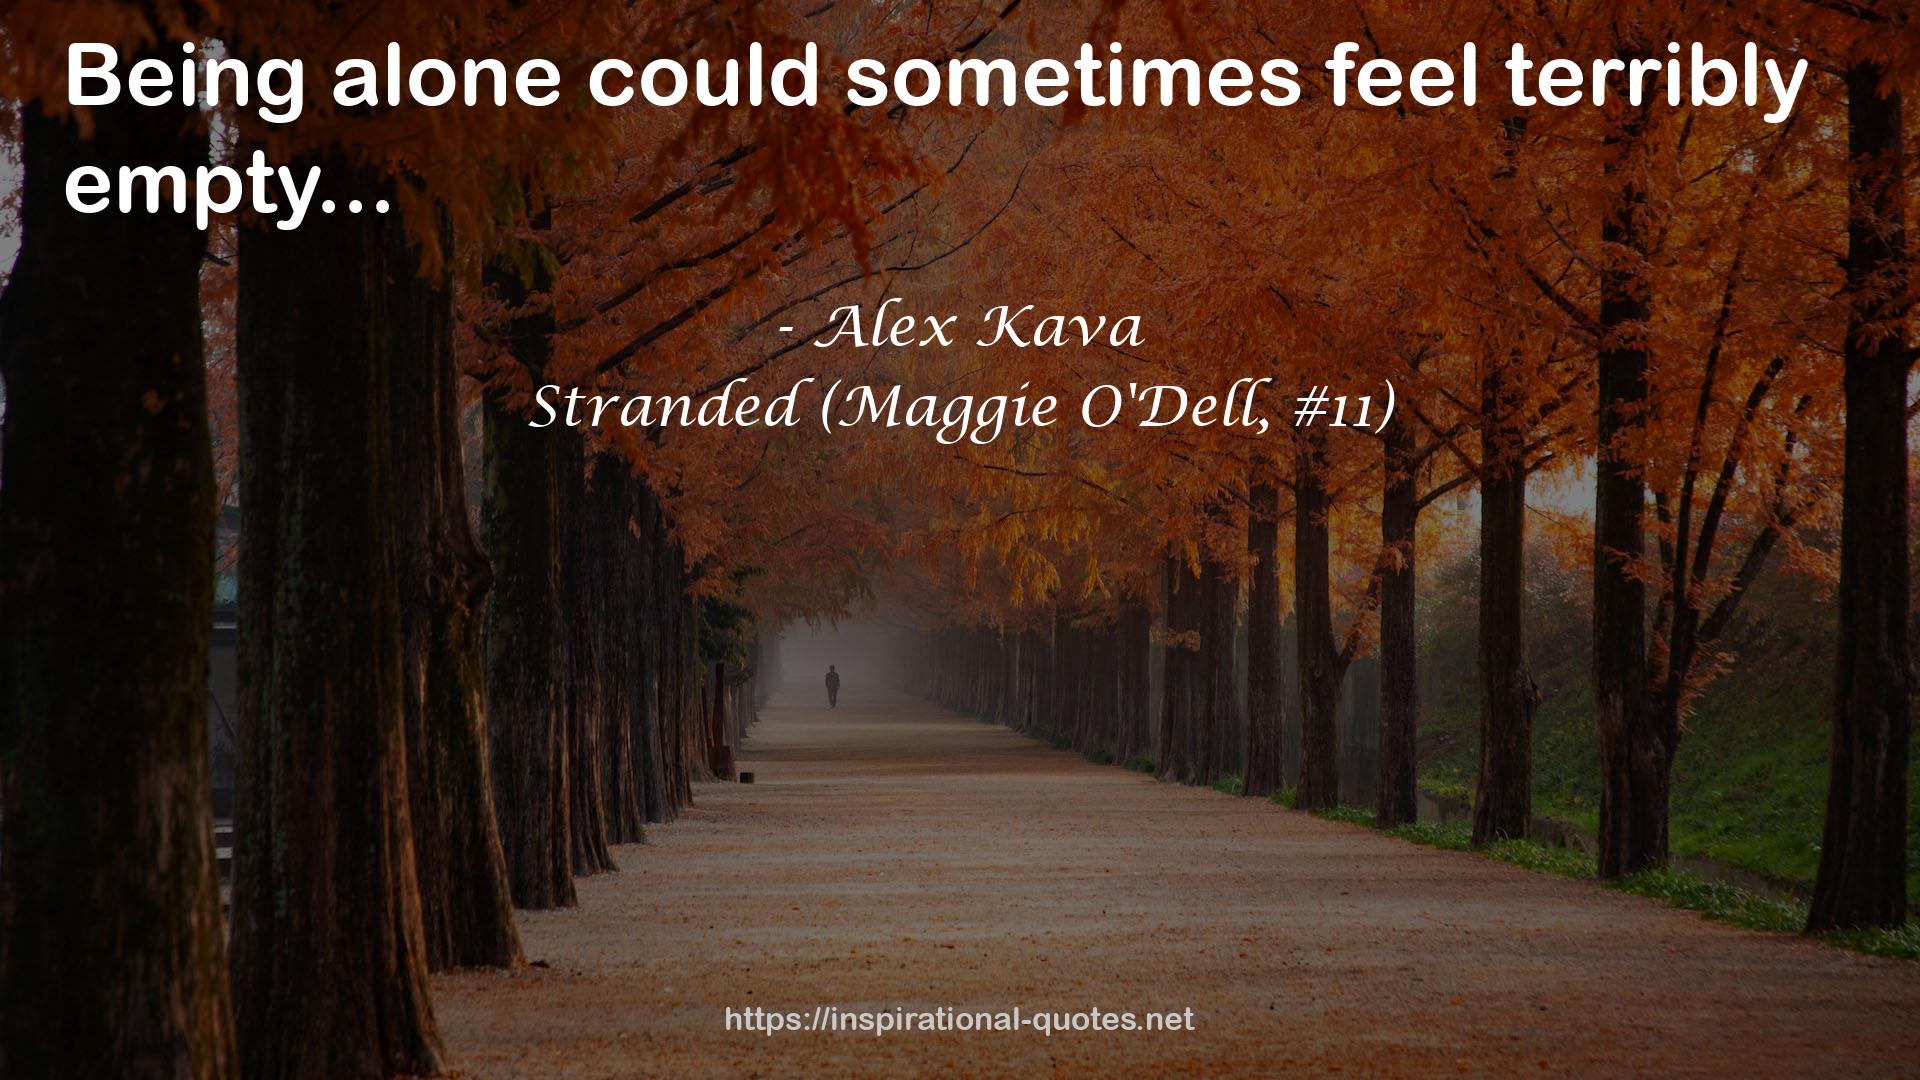 Stranded (Maggie O'Dell, #11) QUOTES